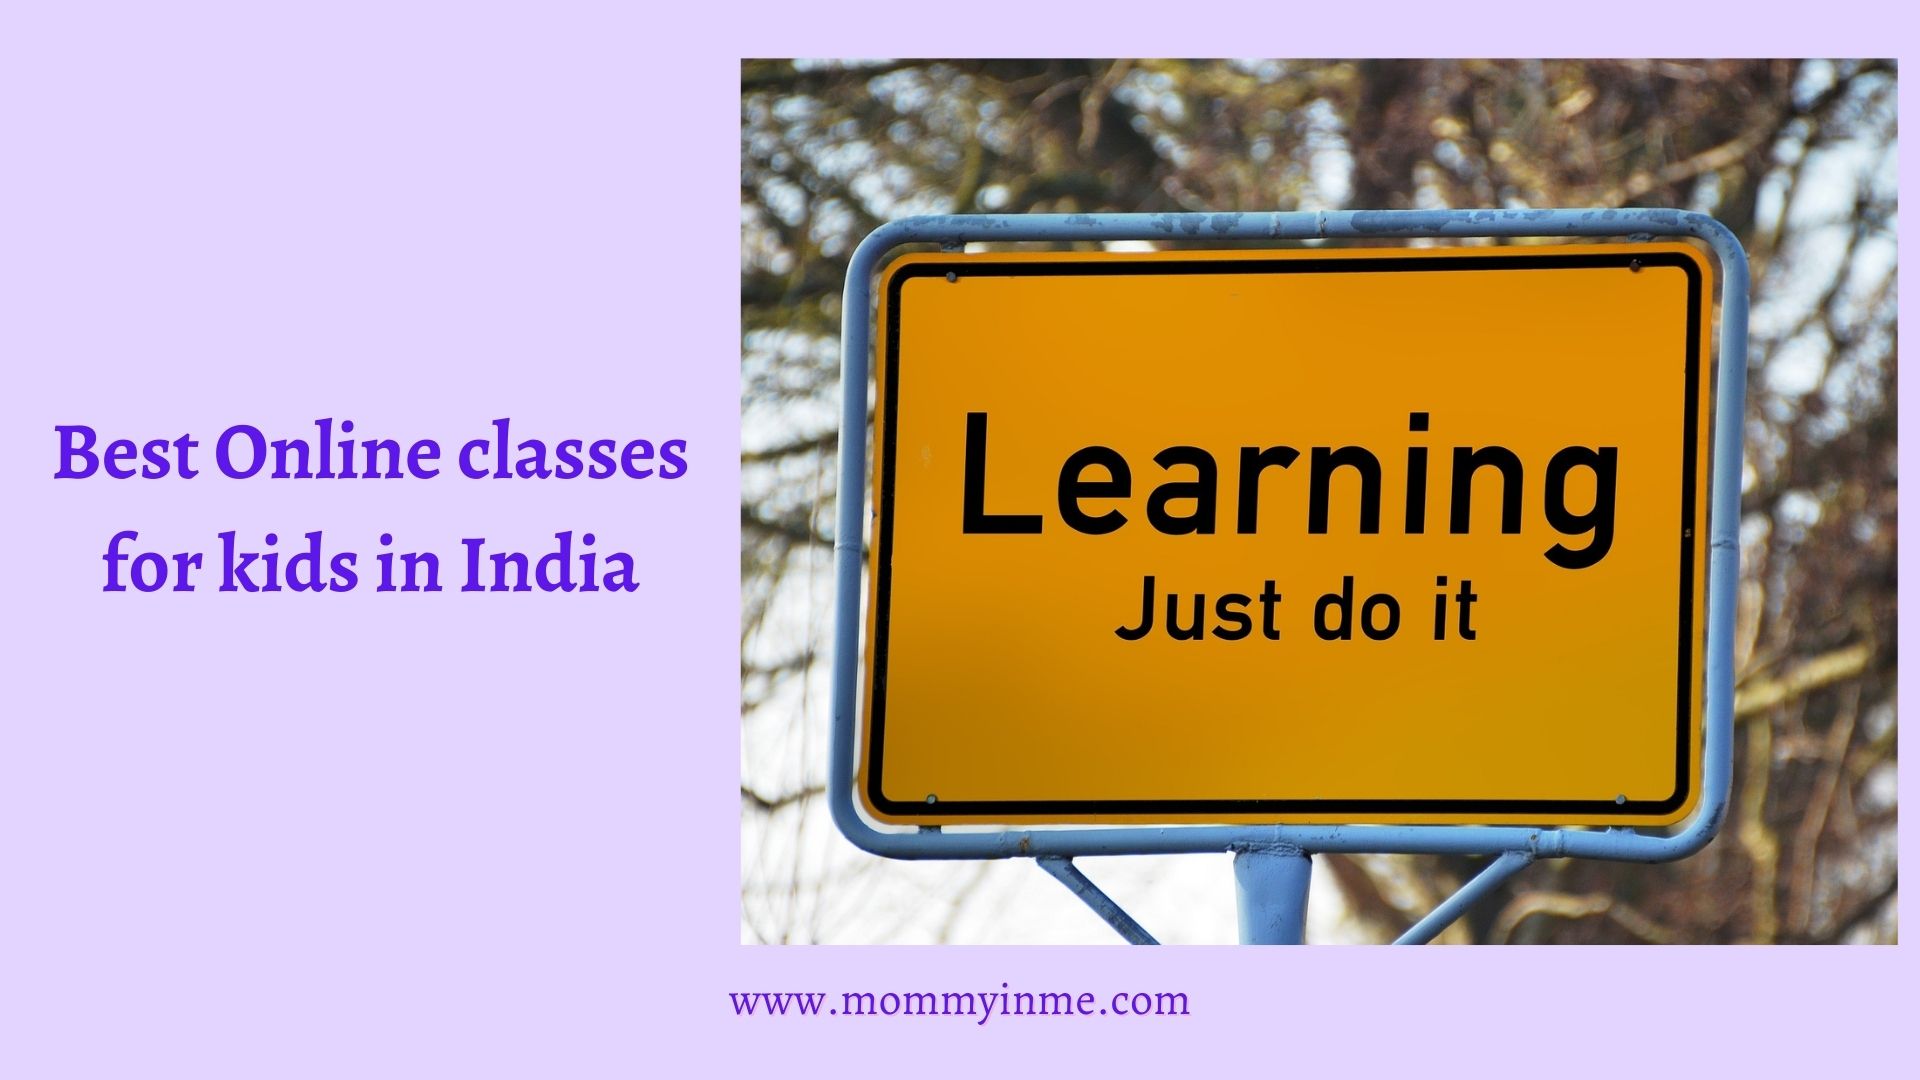 Best Online Live classes for kids in India